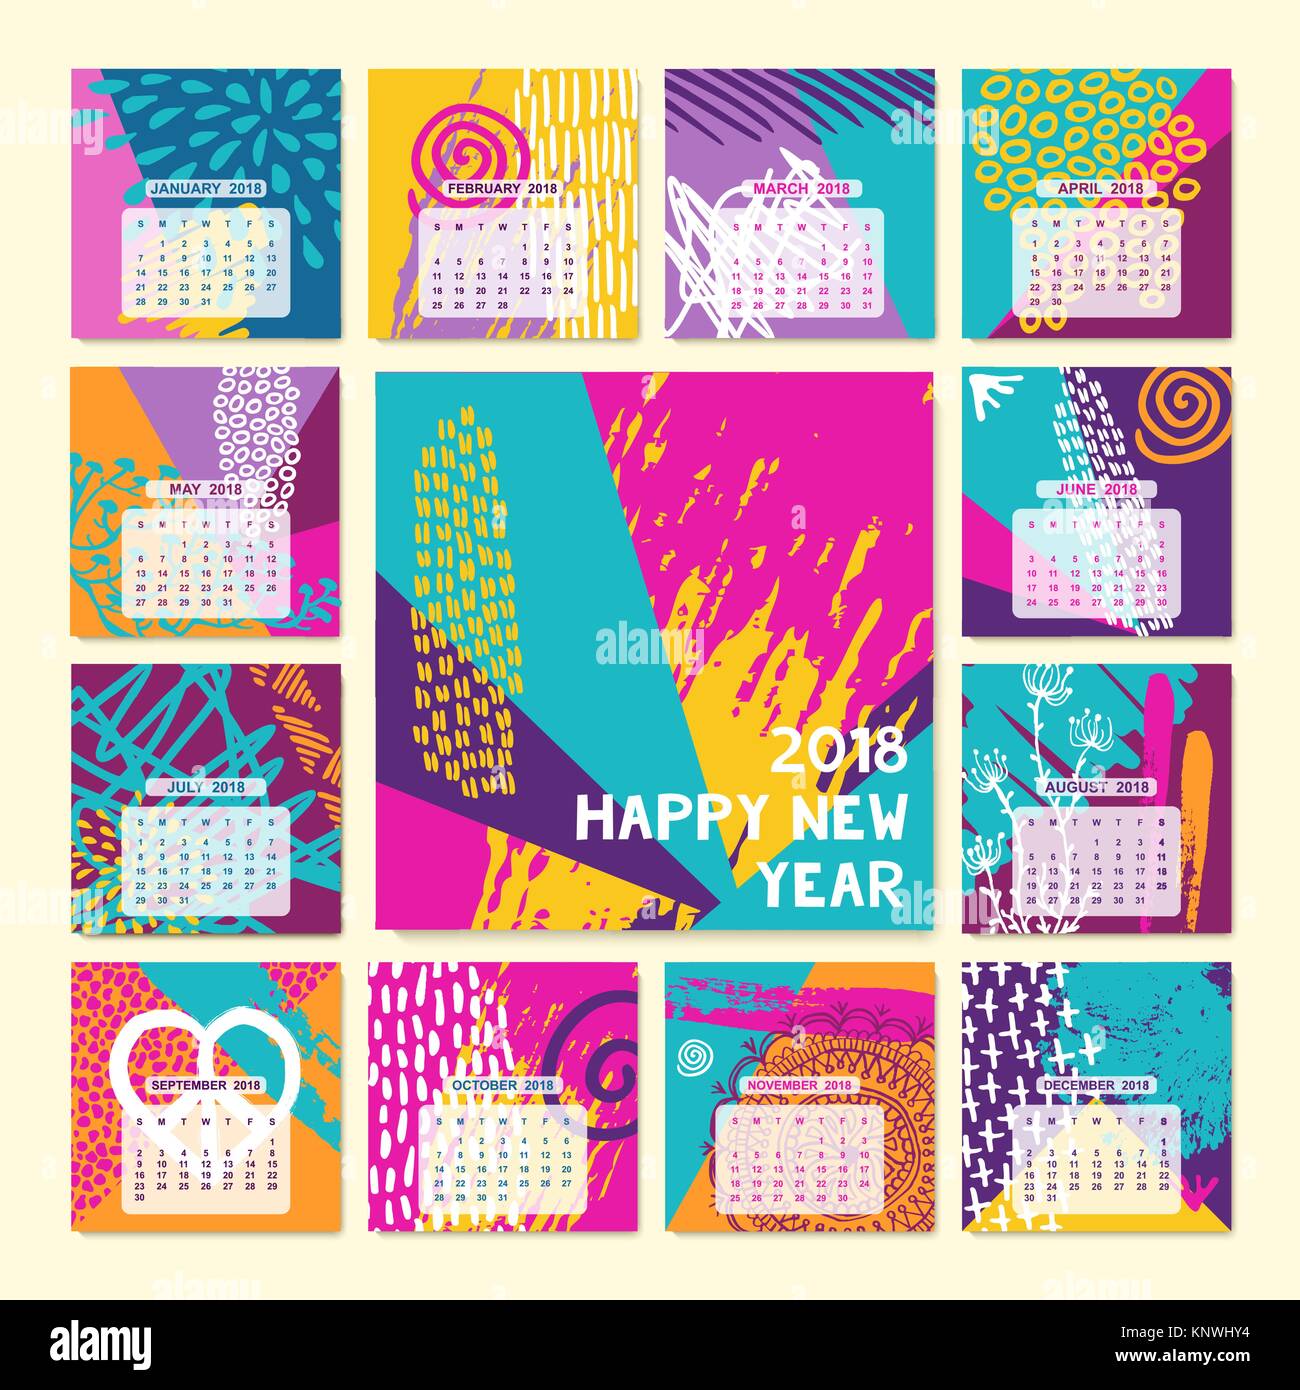 2018 New Year calendar template. Set of monthly planner designs with colorful hand drawn illustration, modern boho style art. EPS10 vector. Stock Vector